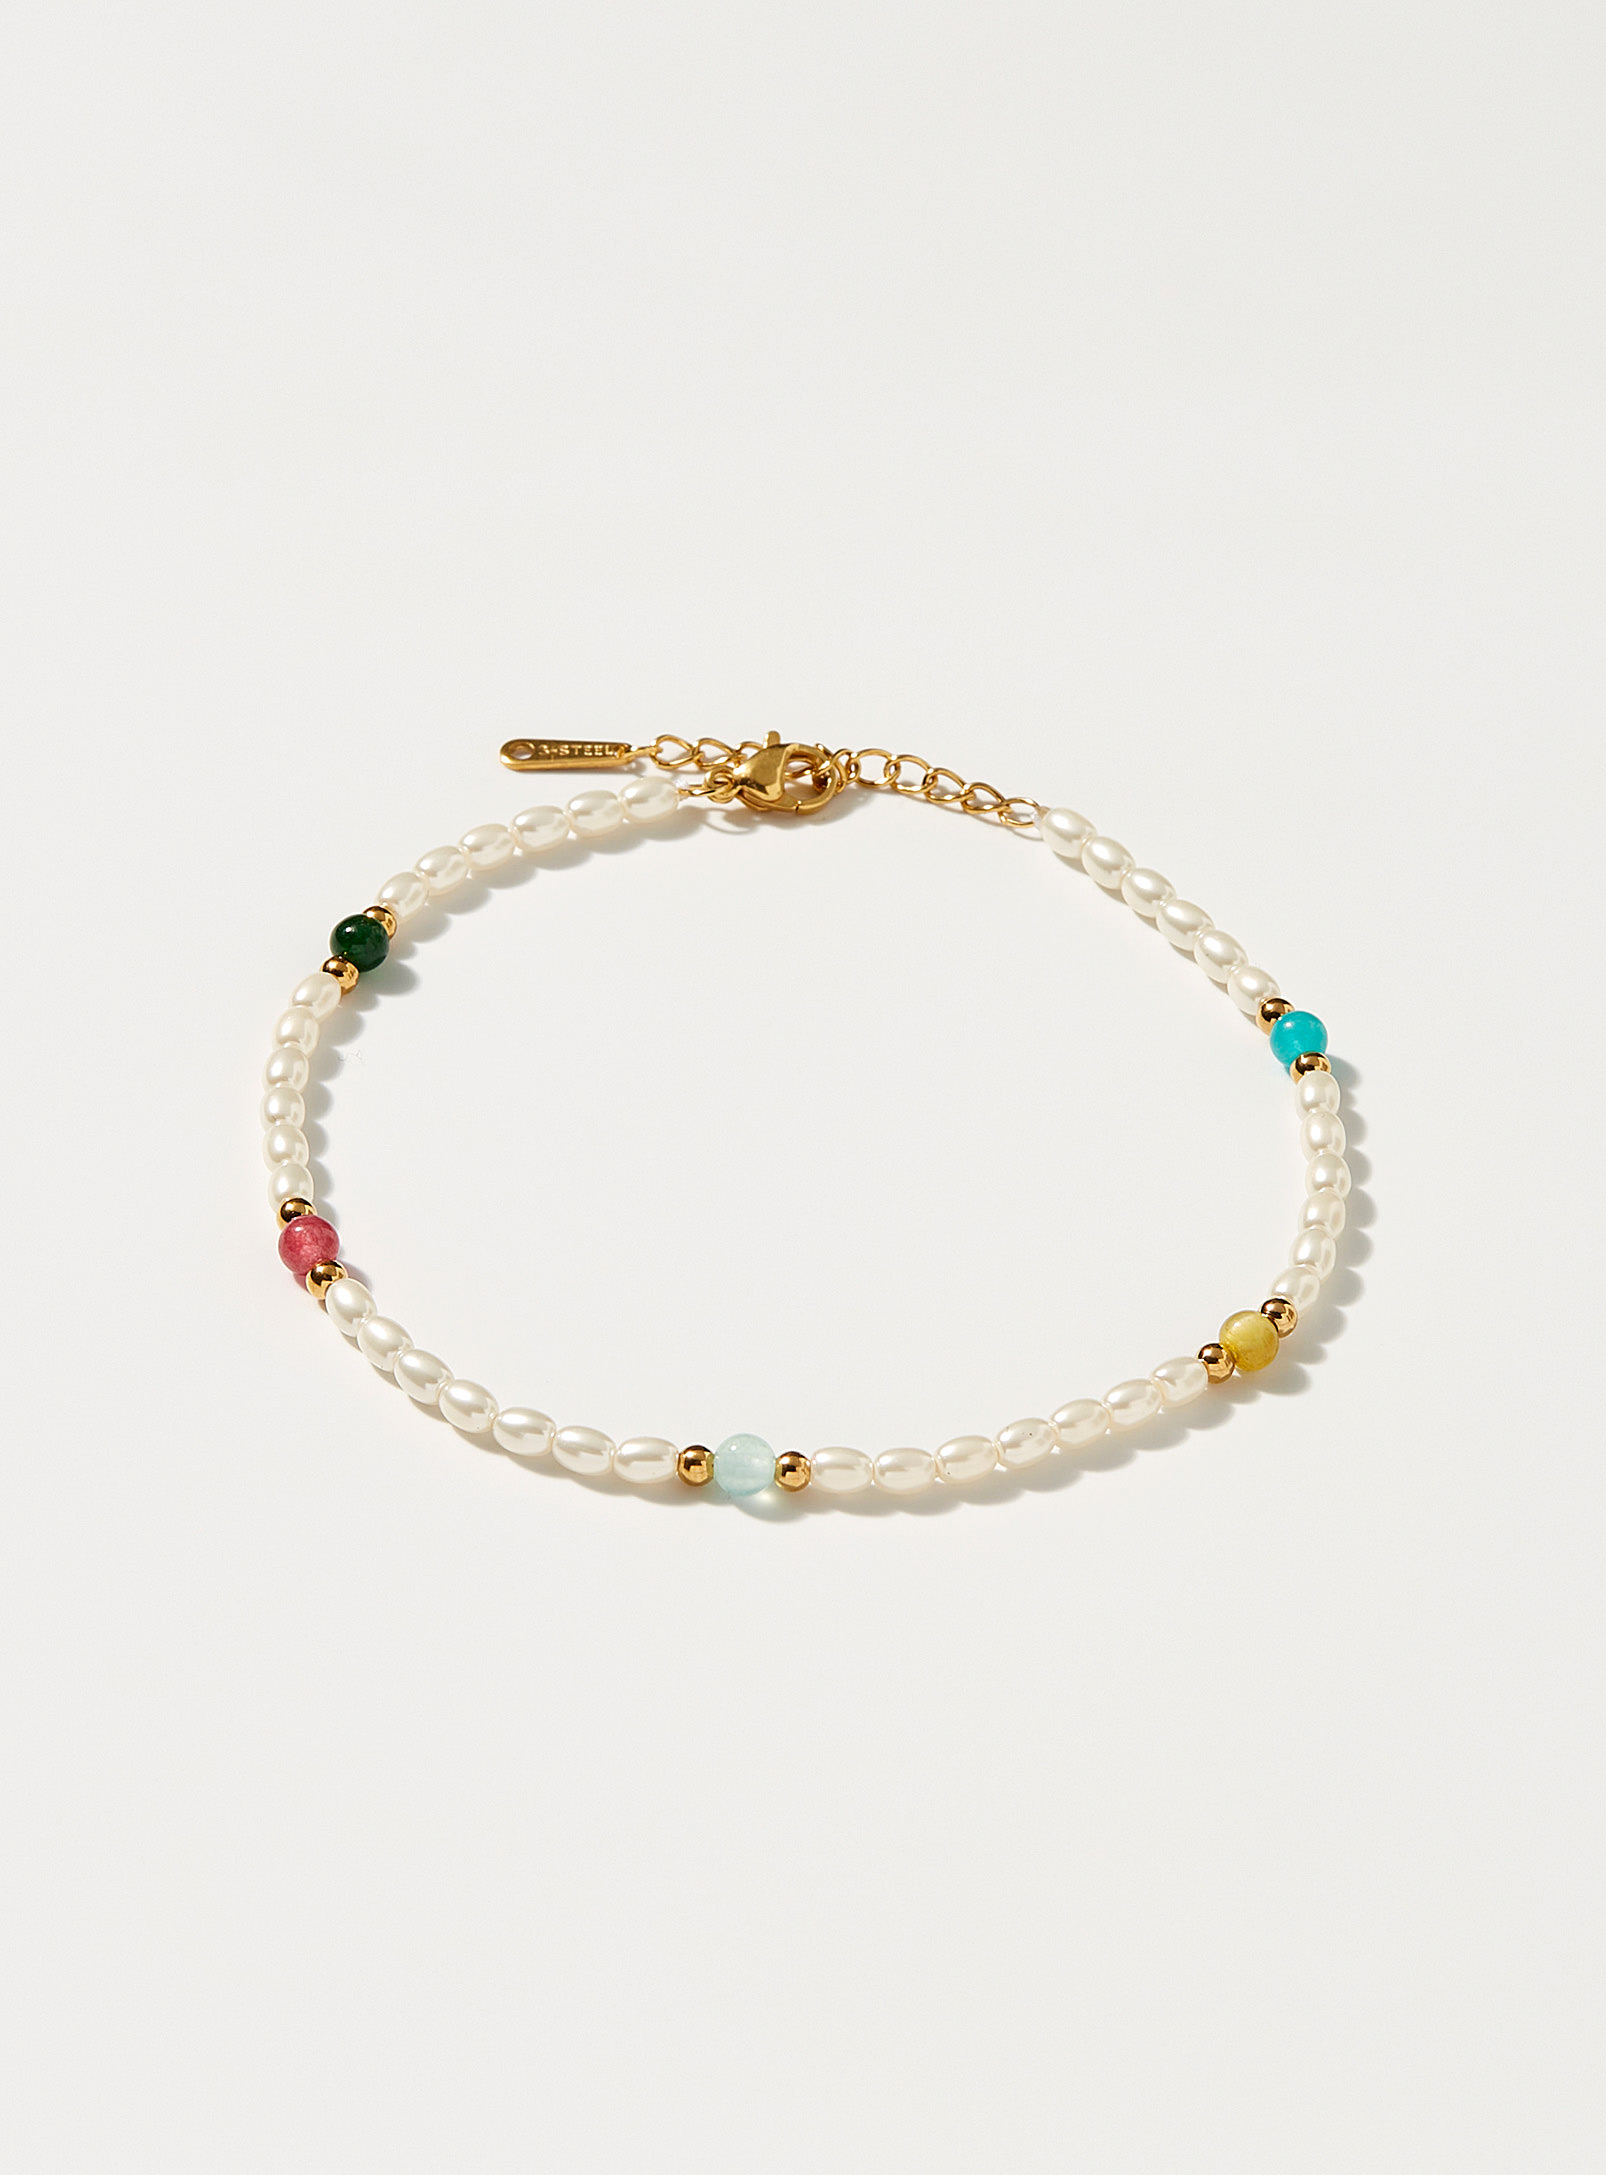 Simons - Women's Pearly bead and natural stone bracelet